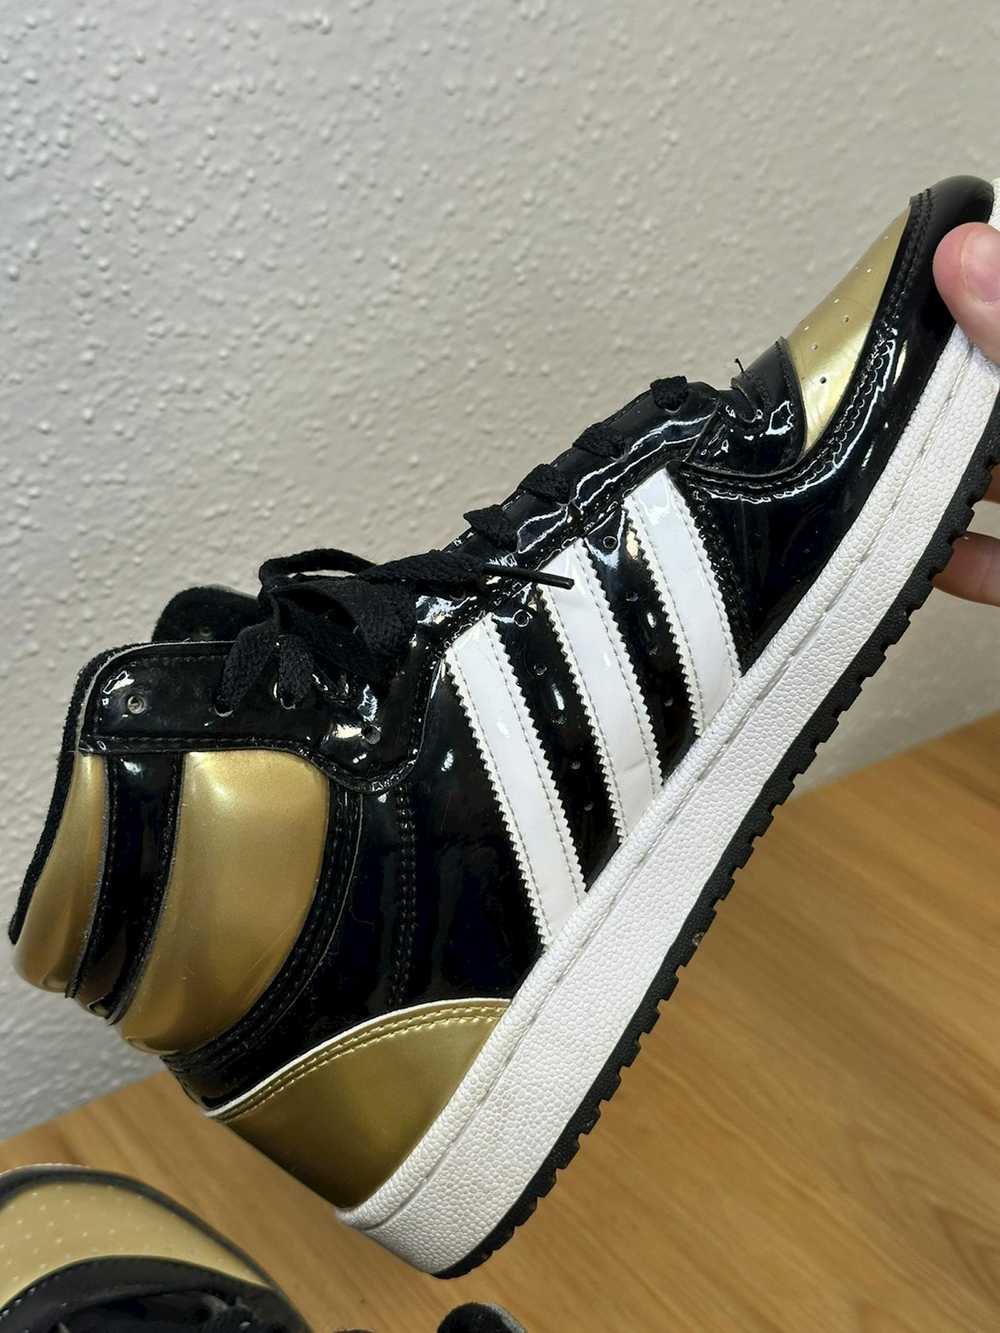 Adidas Top Ten RB Black Gold Patent size 9 - image 4